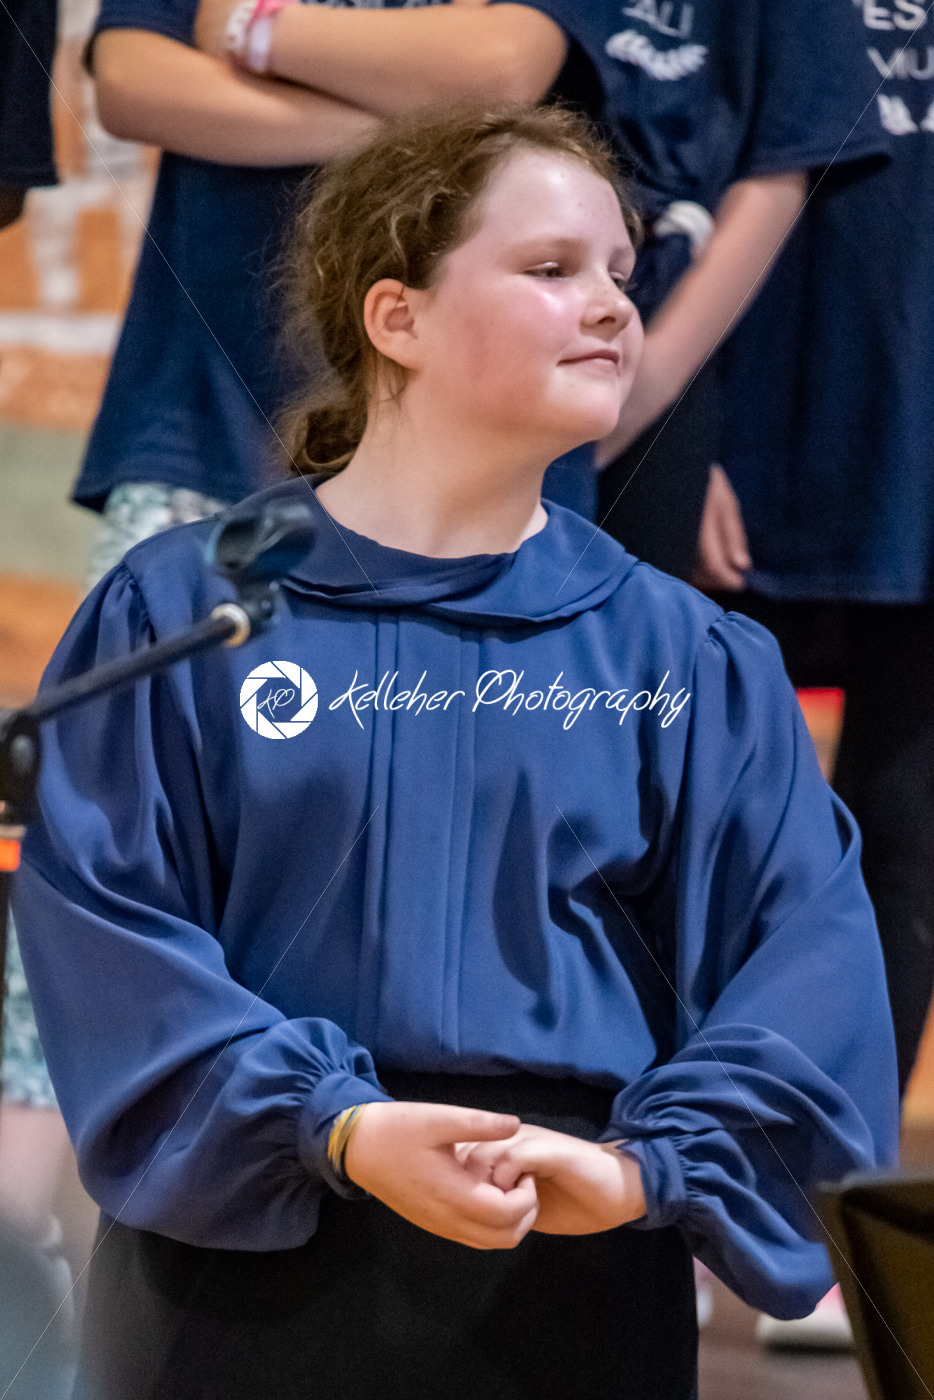 ROSEMONT, PA – MAY 29, 2019: Agnes Irwin: The Musical - Kelleher Photography Store